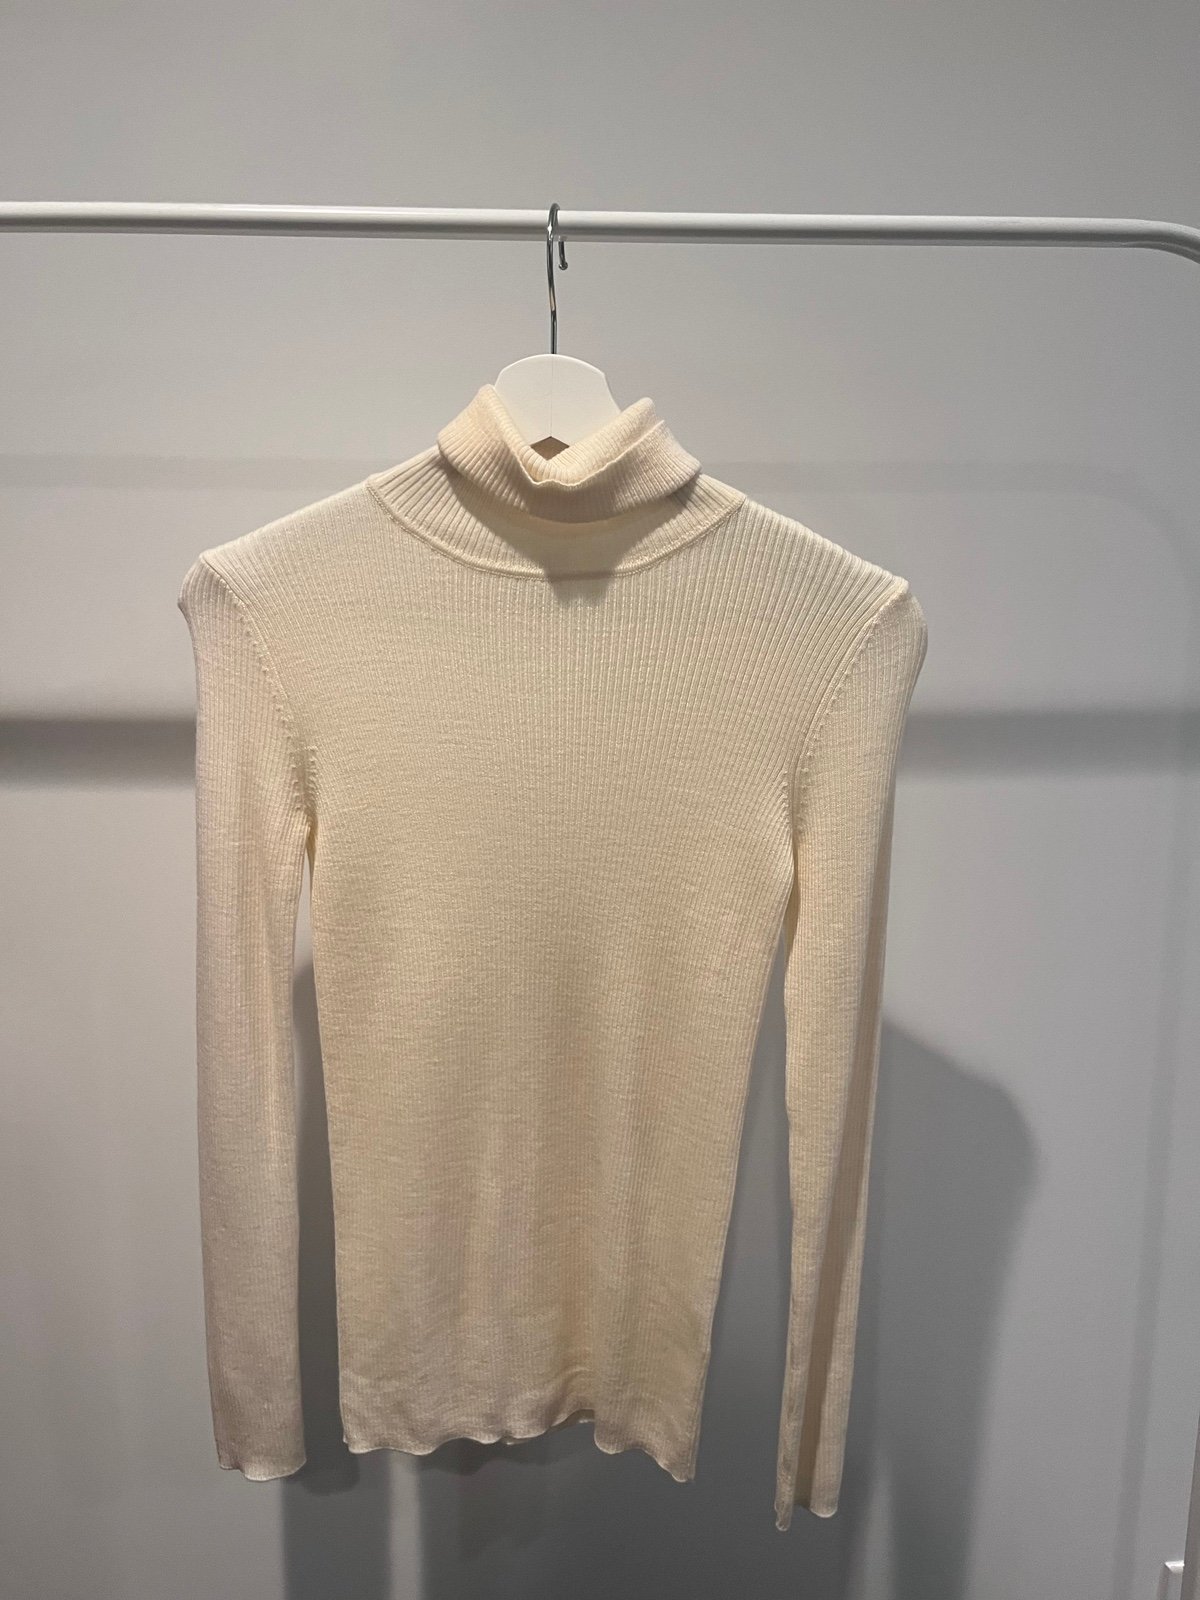 The Best Seller Uniqlo Turtle neck sweater lw18pE0RH just for you